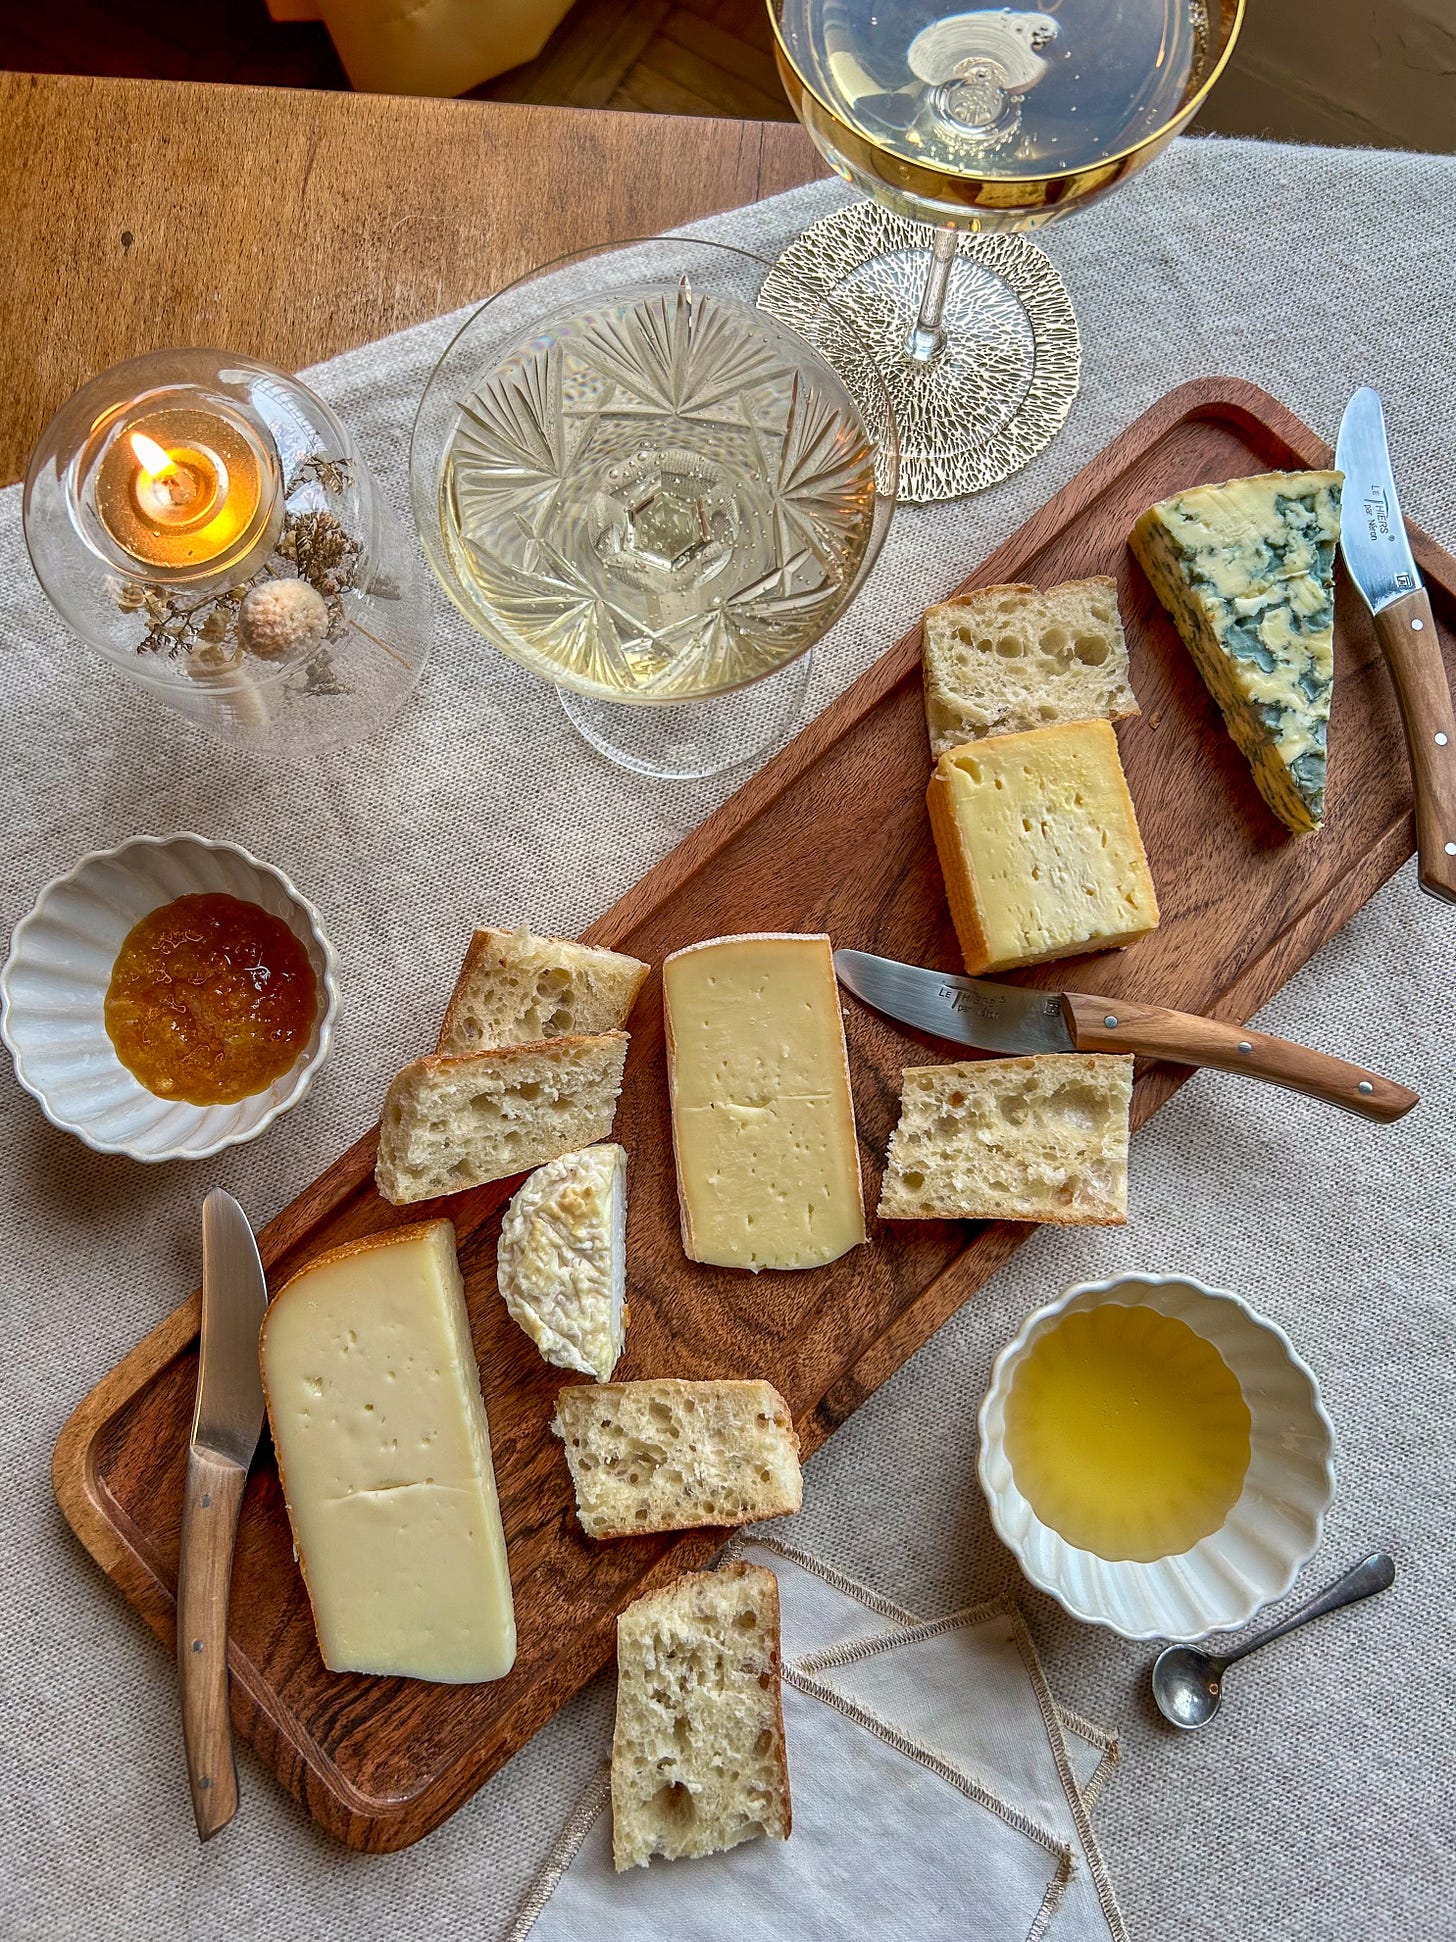 Glasses of Champagne wait for guests at a party with a cheese platter and bread